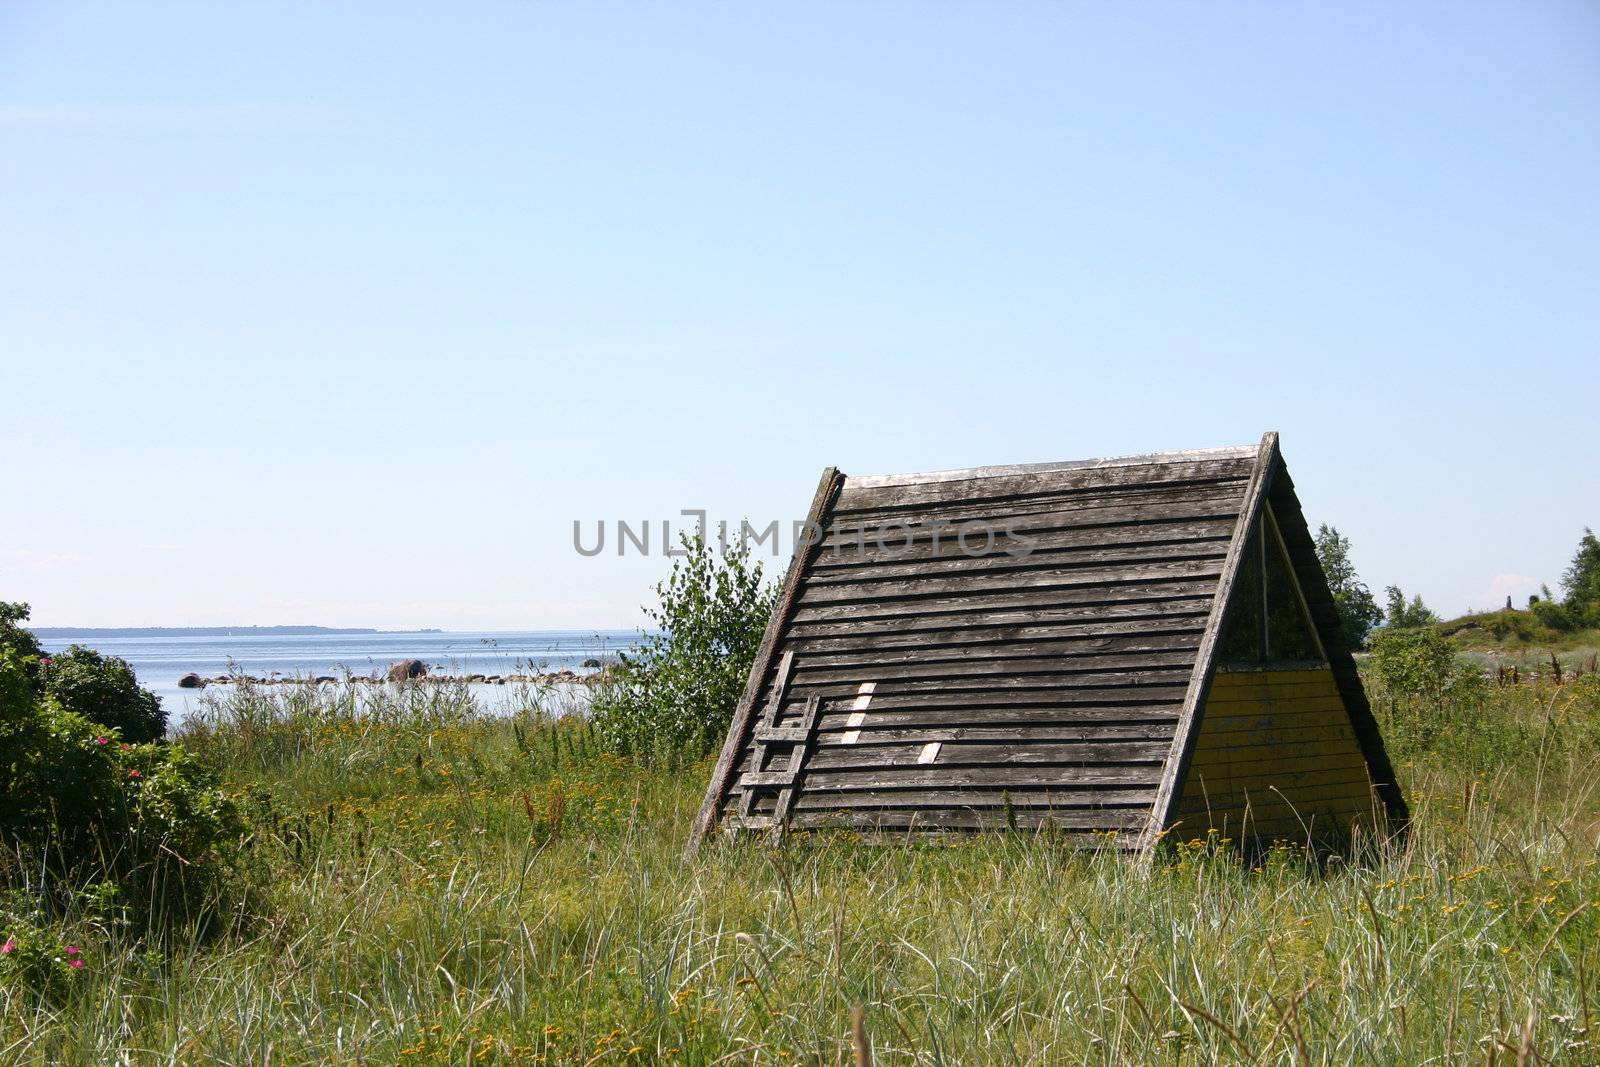 Tent at the seashore, a wooden house